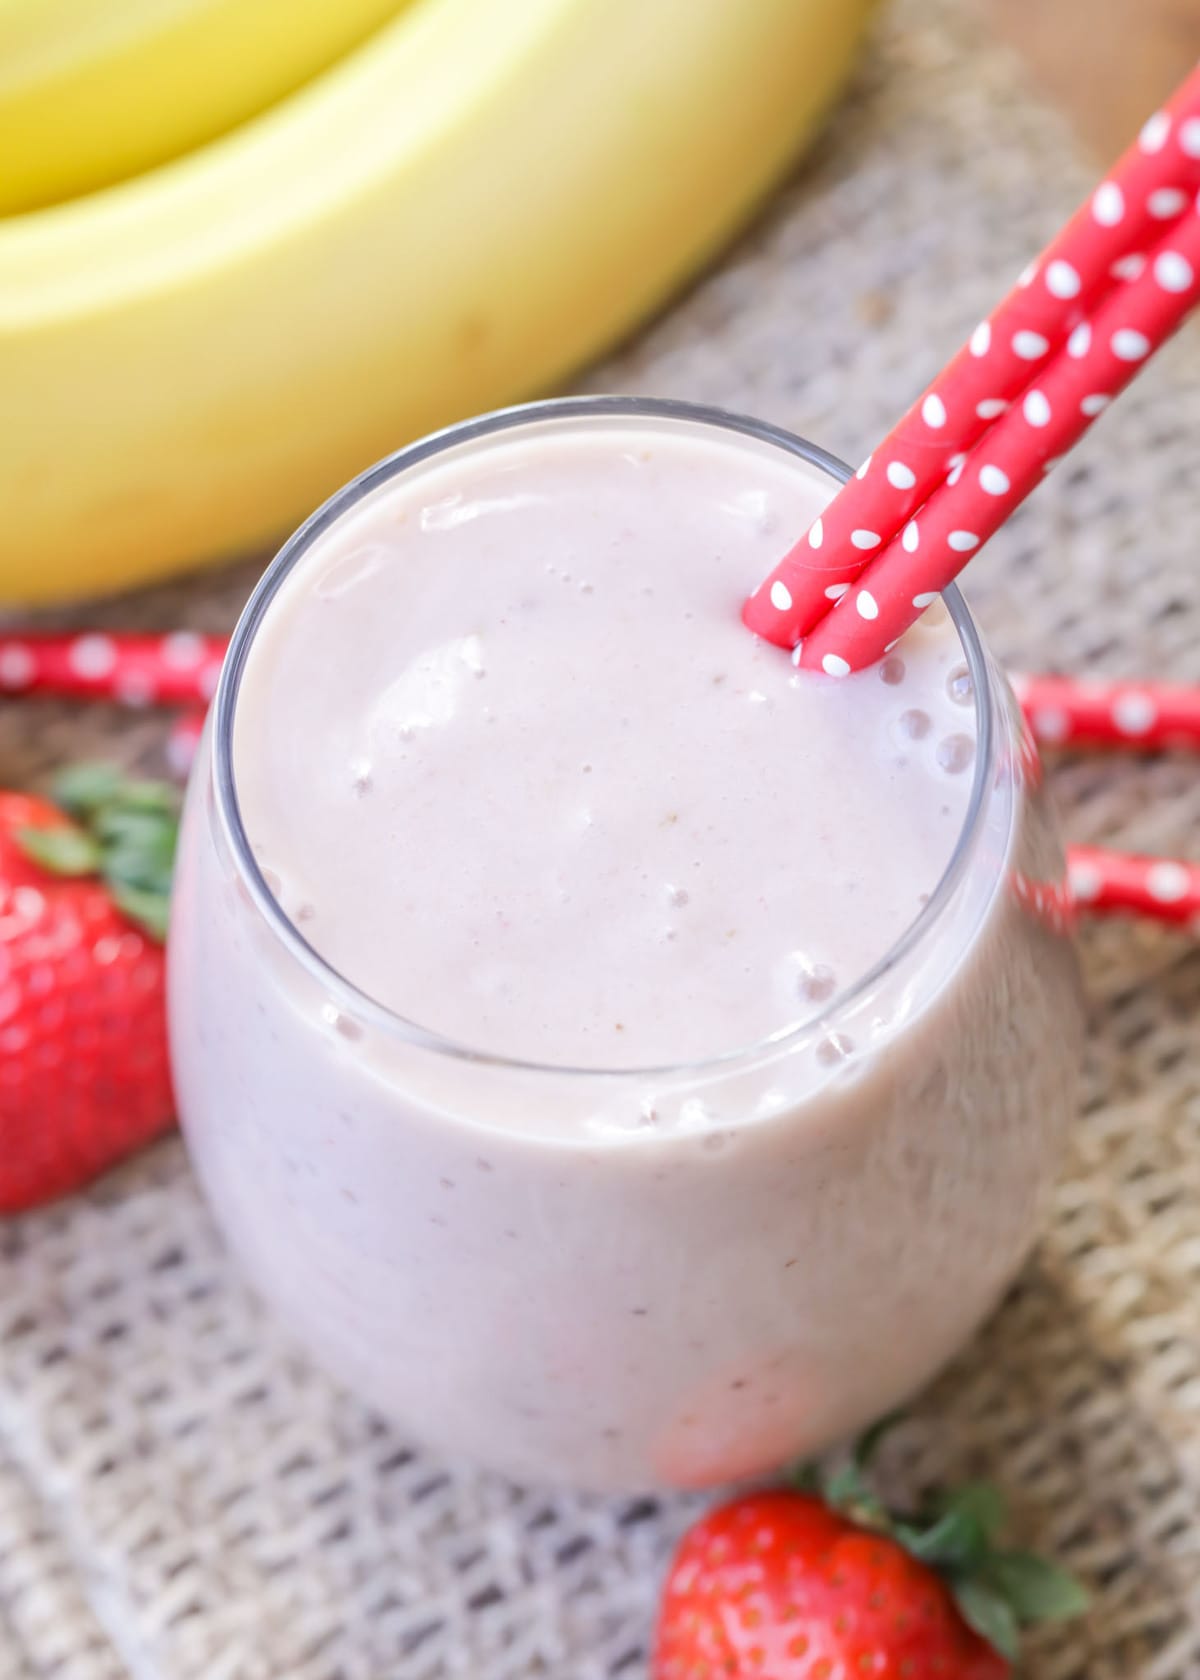 strawberry and banana smoothie in a cup with red straws